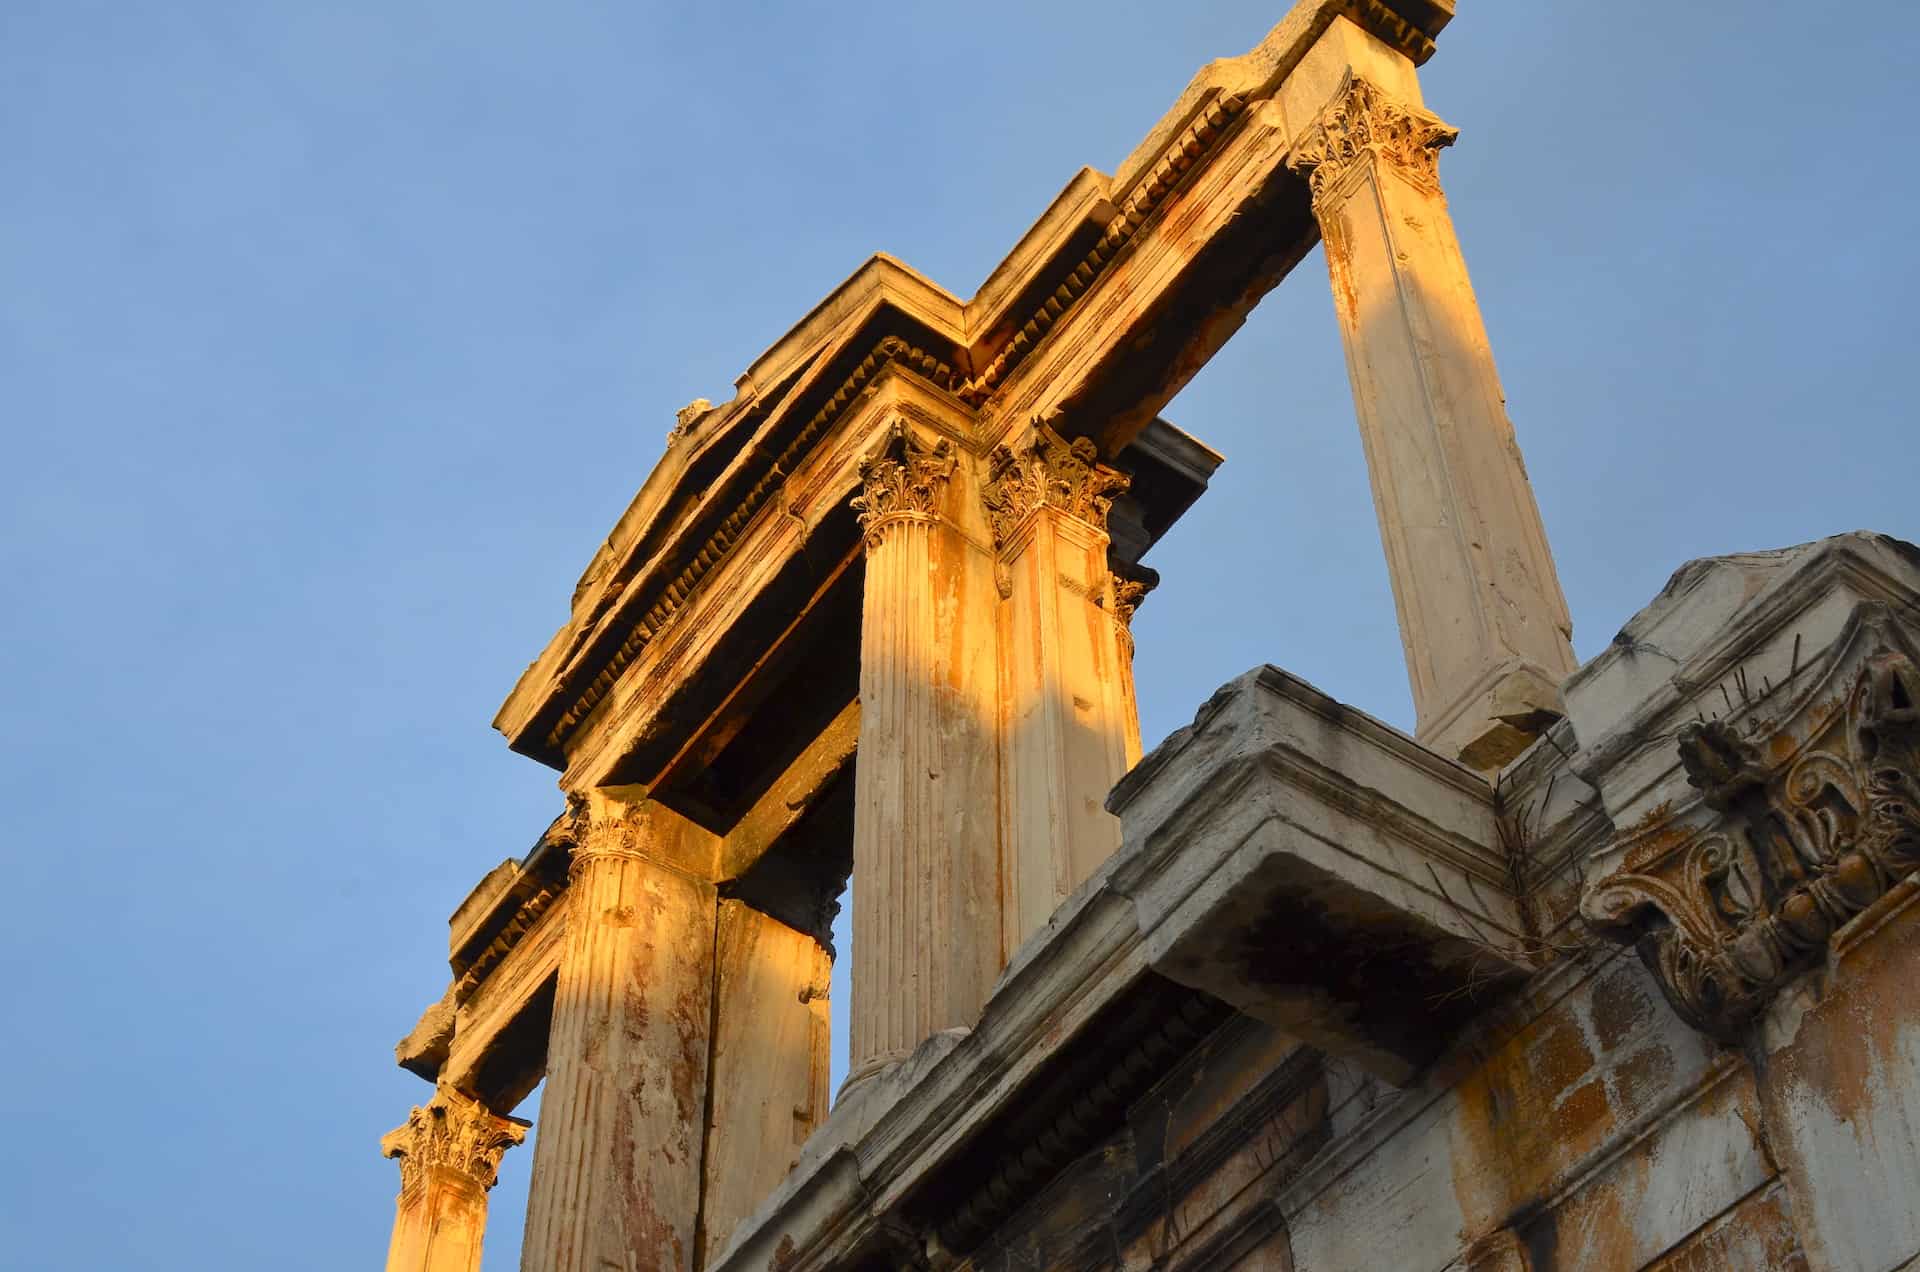 Looking up at Hadrian's Arch in Athens, Greece